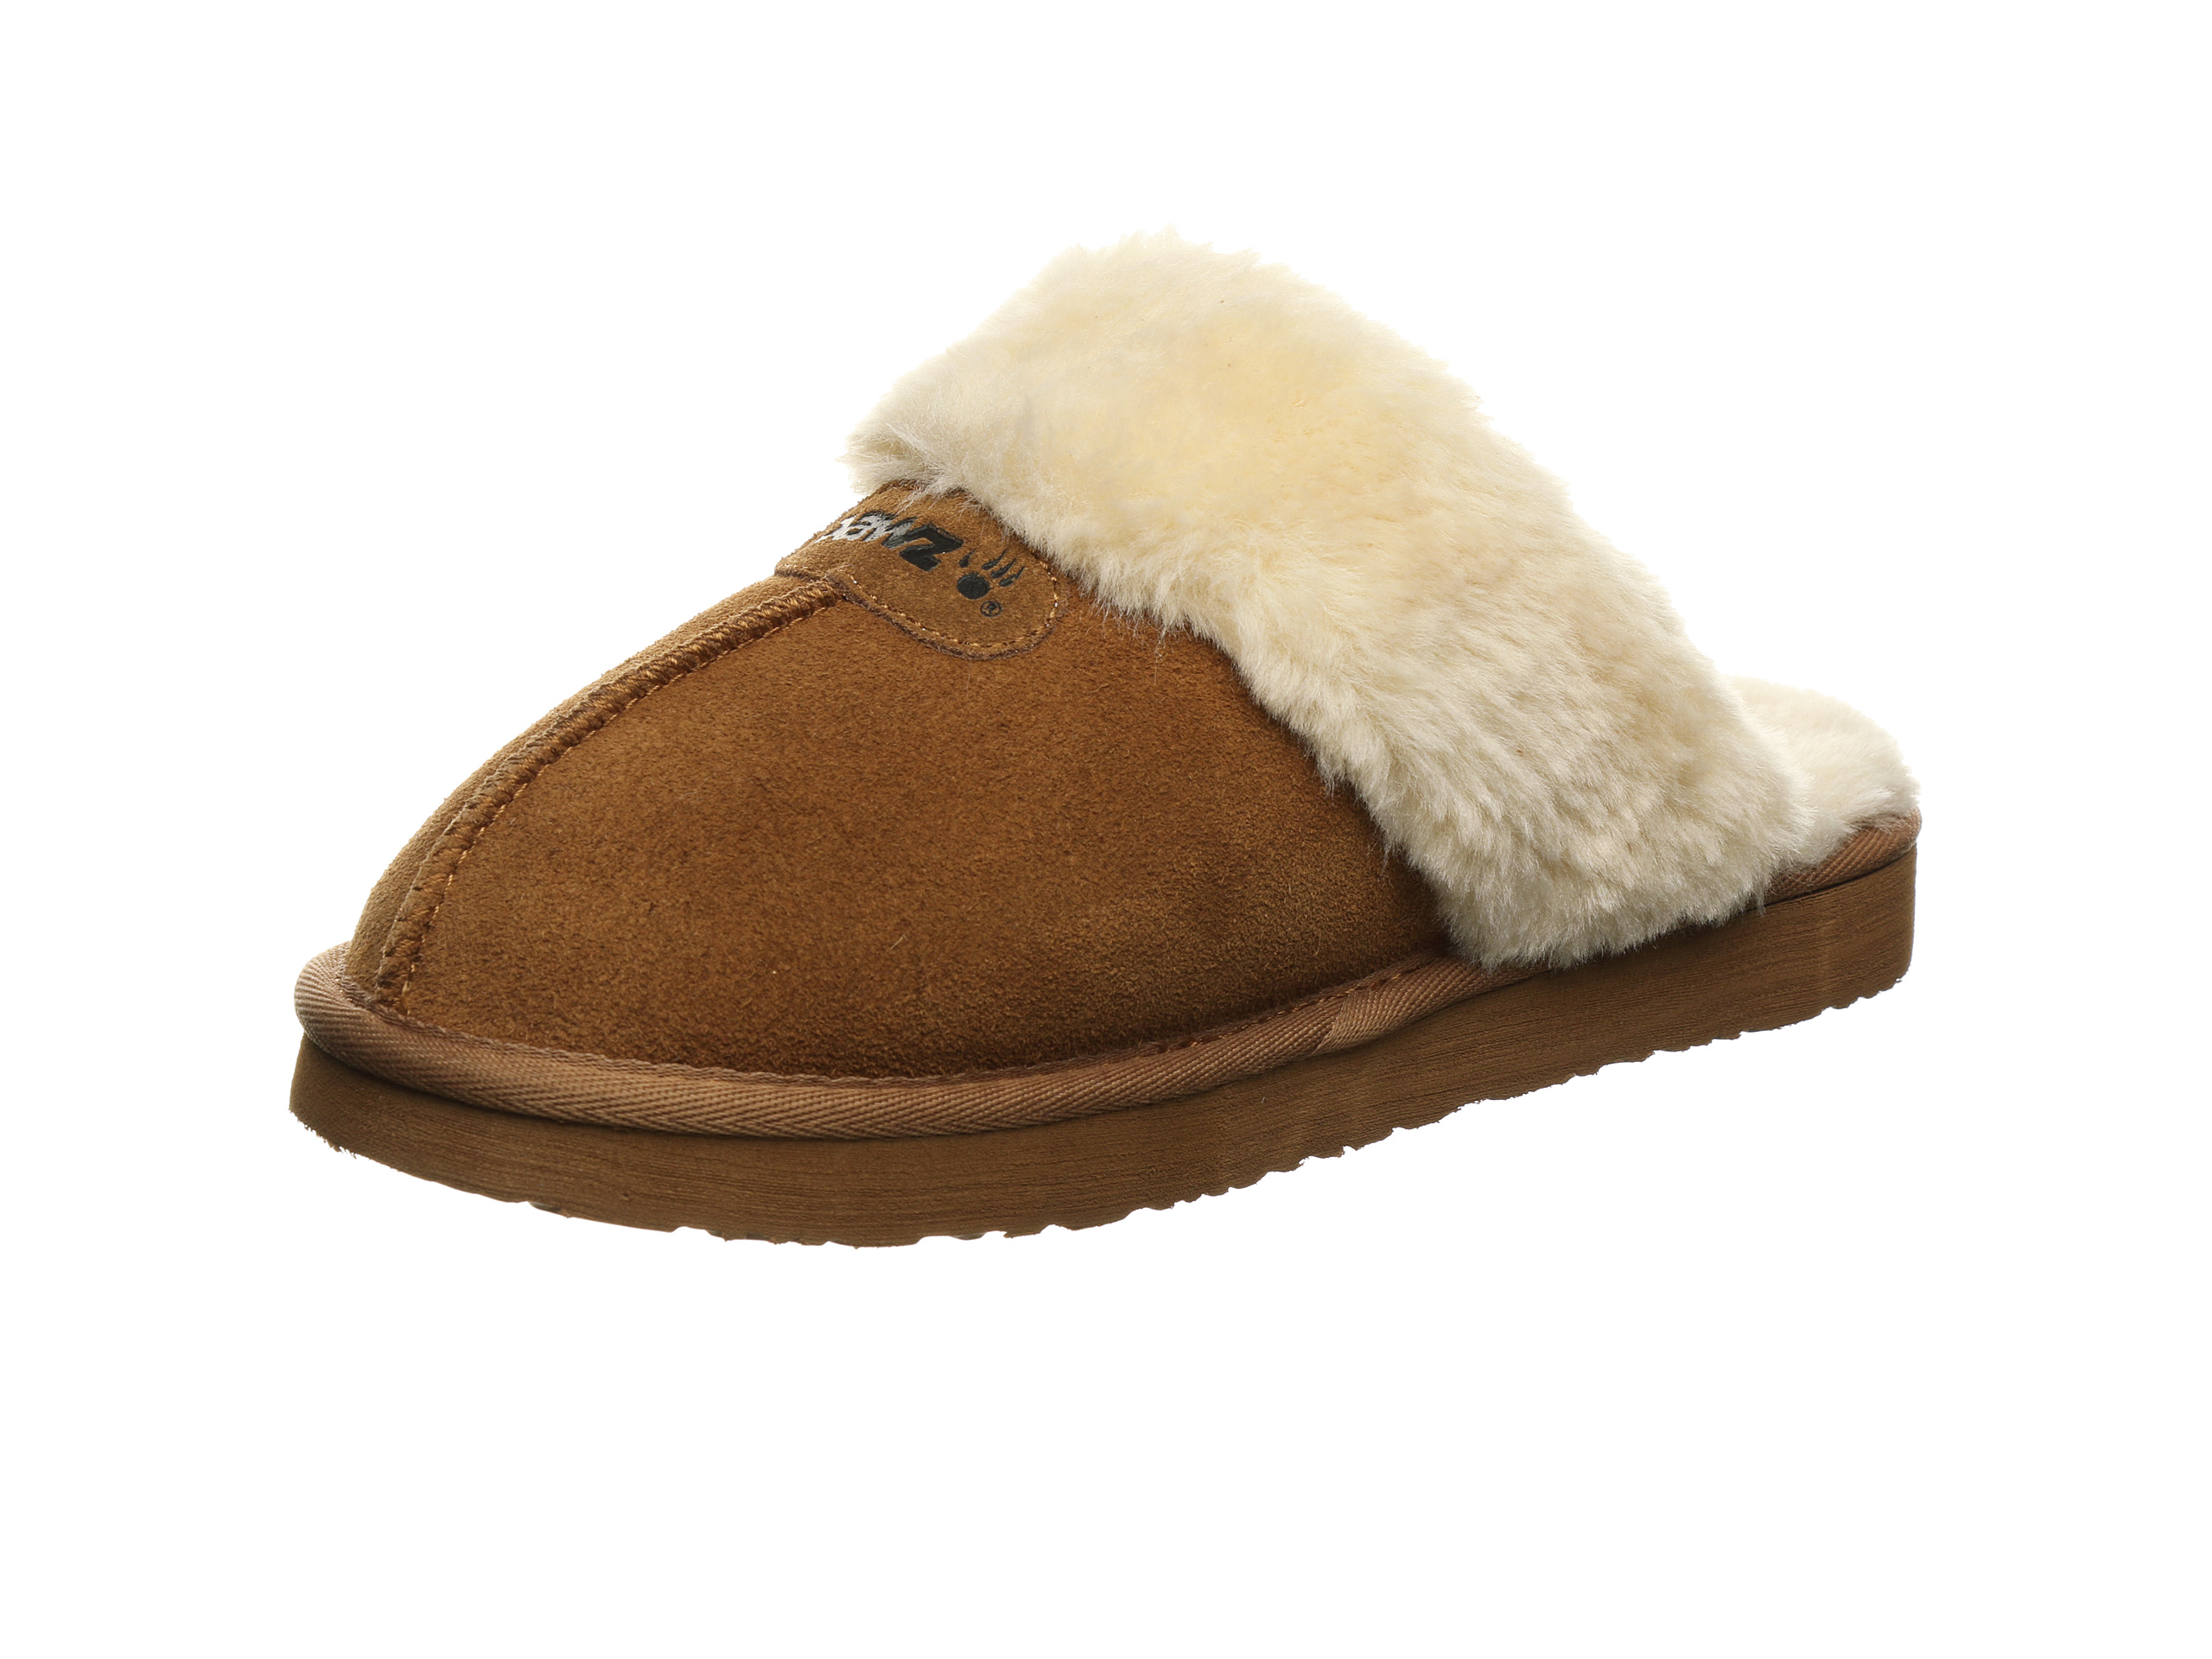 Pawz by Bearpaw Meredith Faux Fur Lined Suede Scuff Slipper (Women's) - image 5 of 15